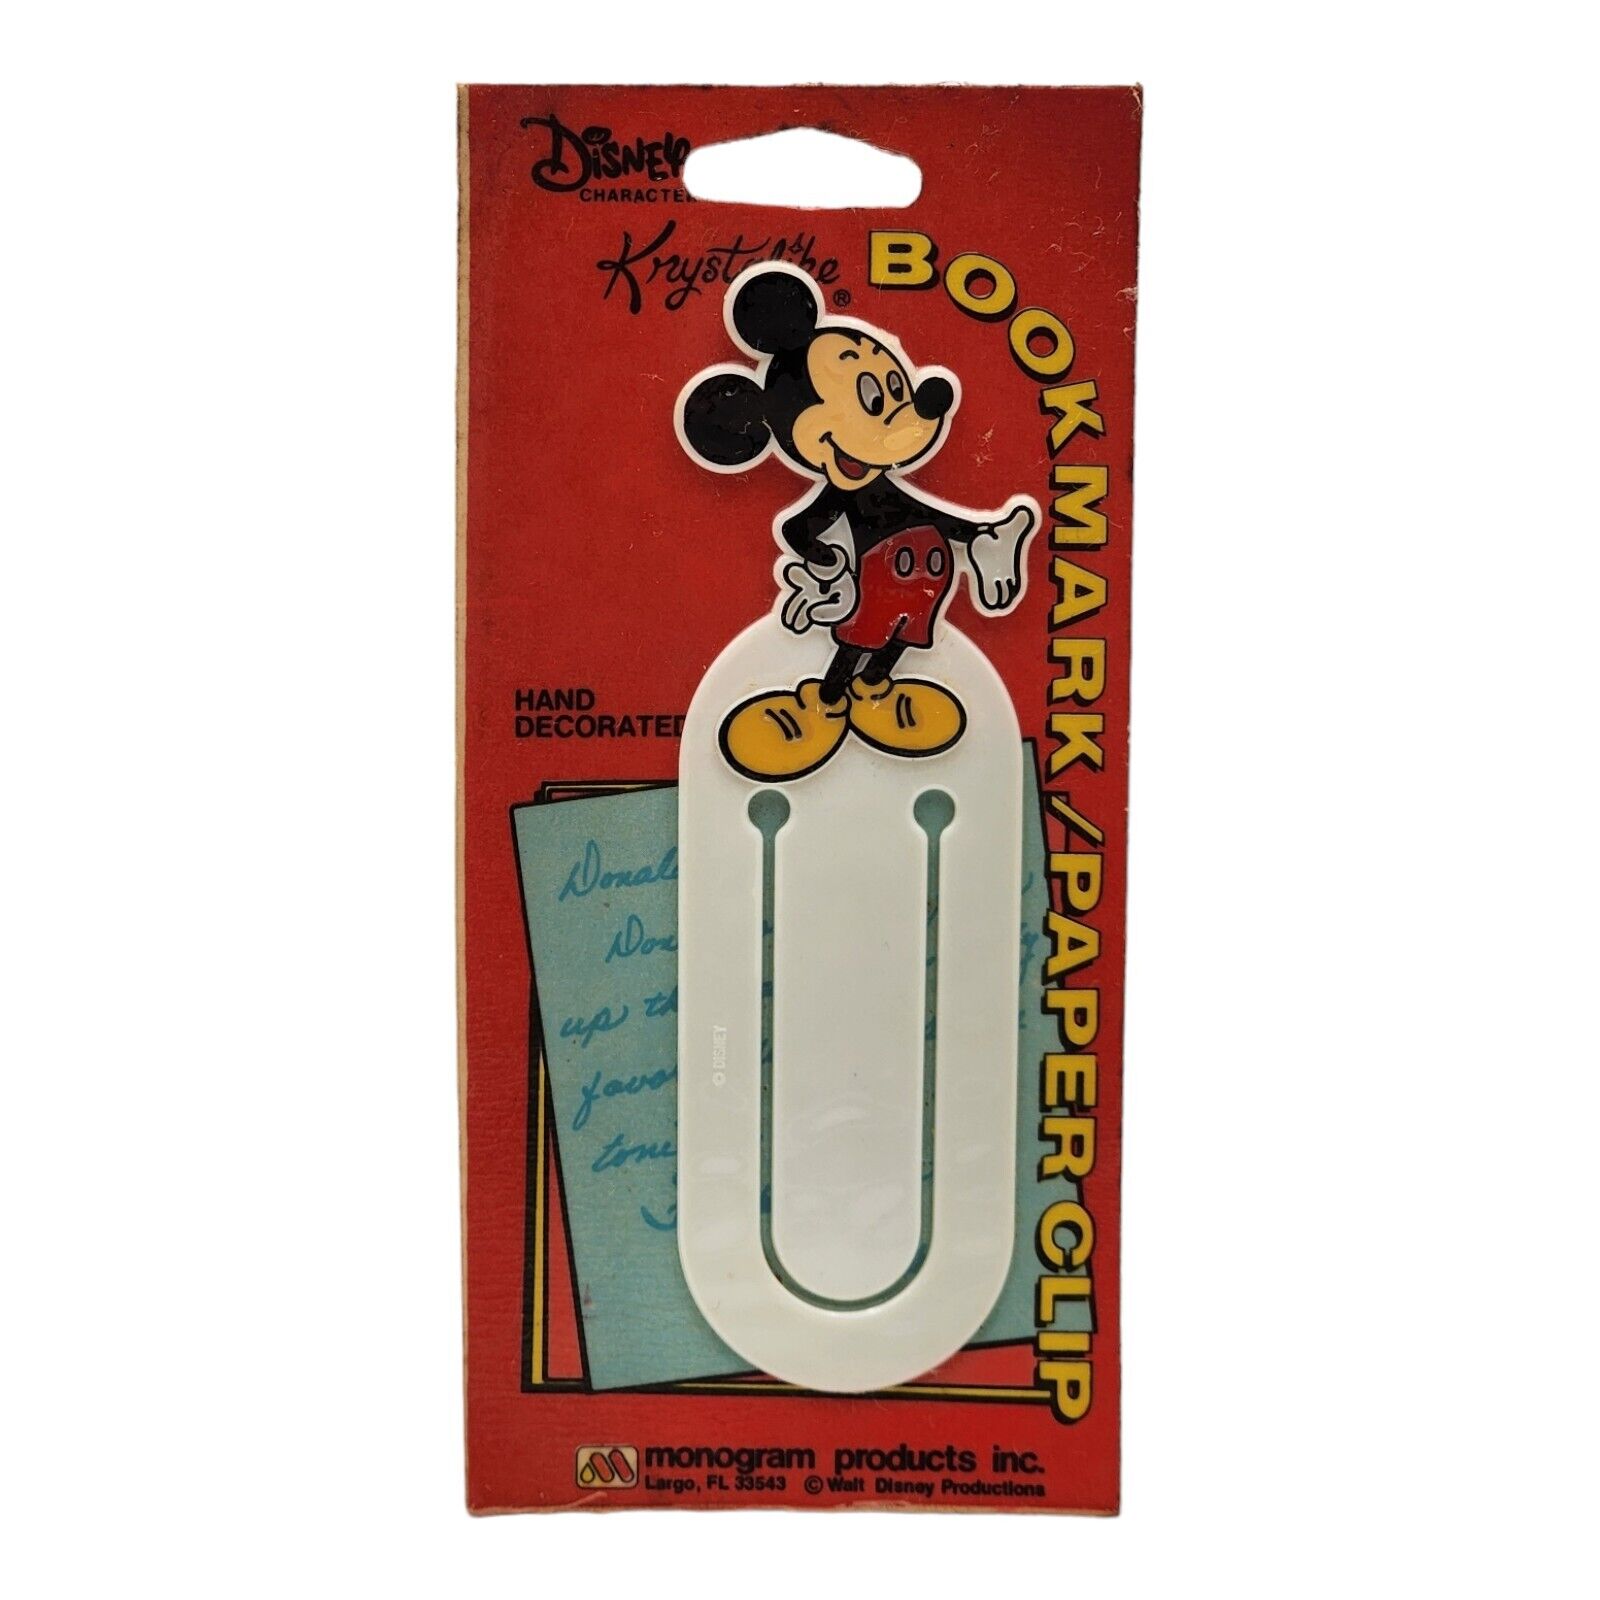 Rare Vintage Disney Mickey Mouse bookmark Giant paper clip New Sealed